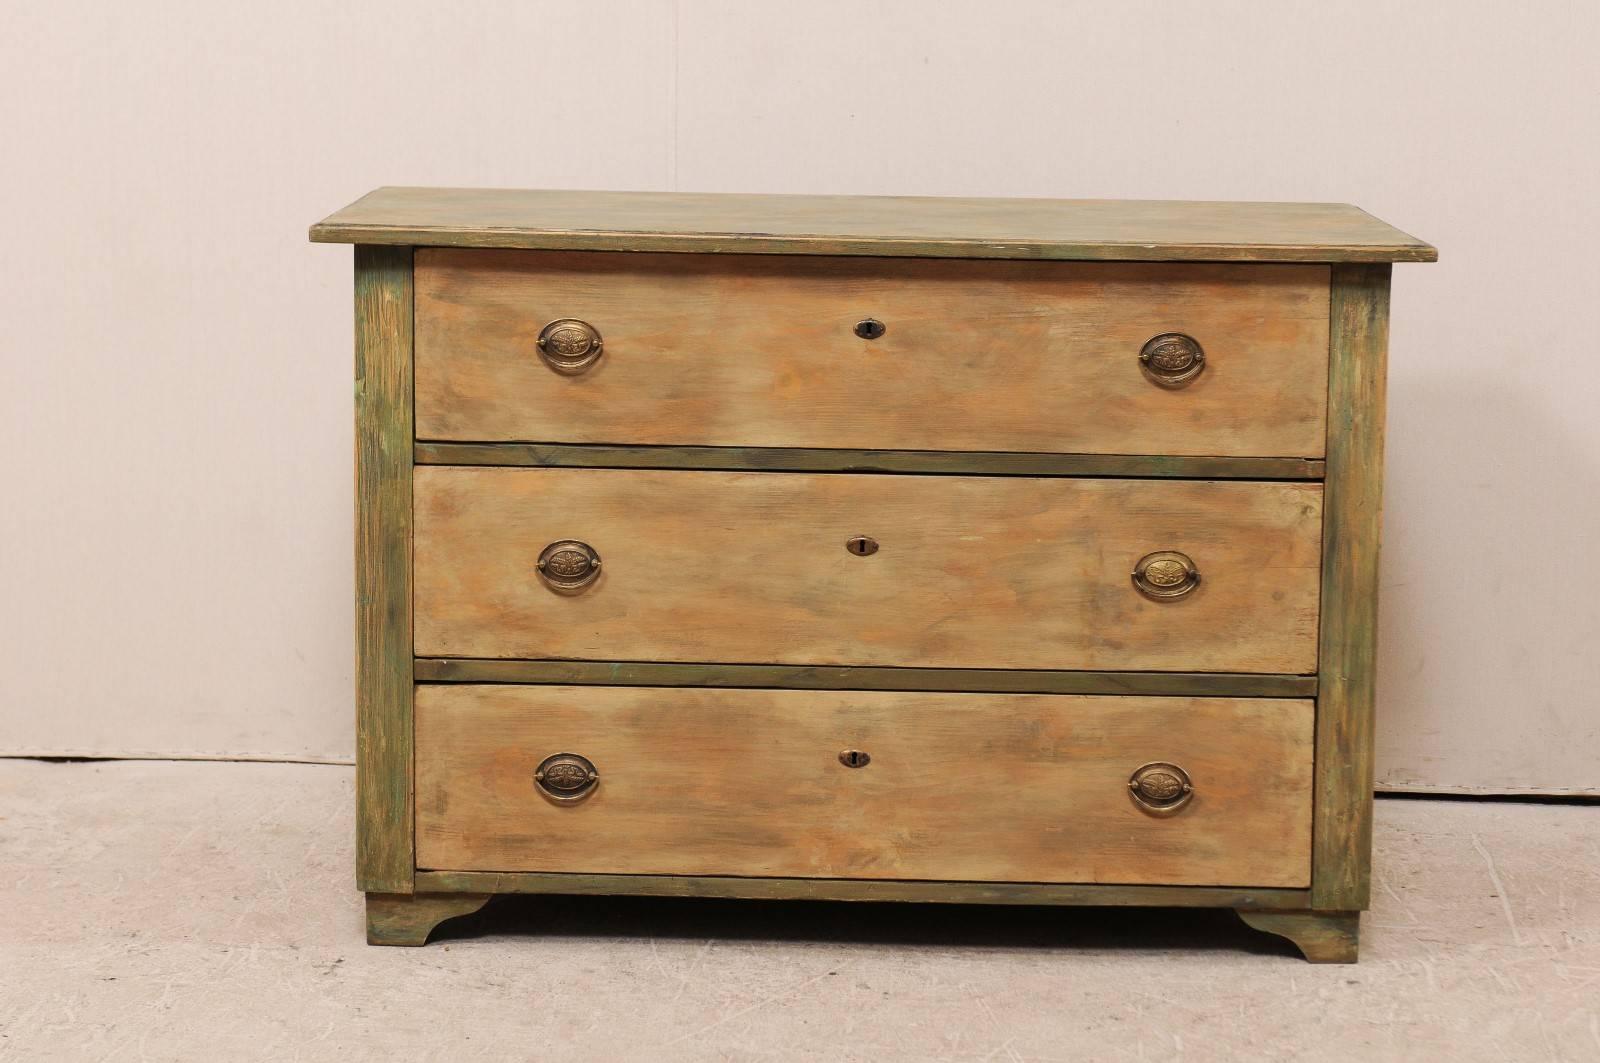 A Swedish three-drawer chest from the 19th century. This Swedish, 19th century painted wood chest features a subtle faux painted marble top over three dovetail jointed drawers and is raised upon bracket feet. This chest has a lightly washed finish,